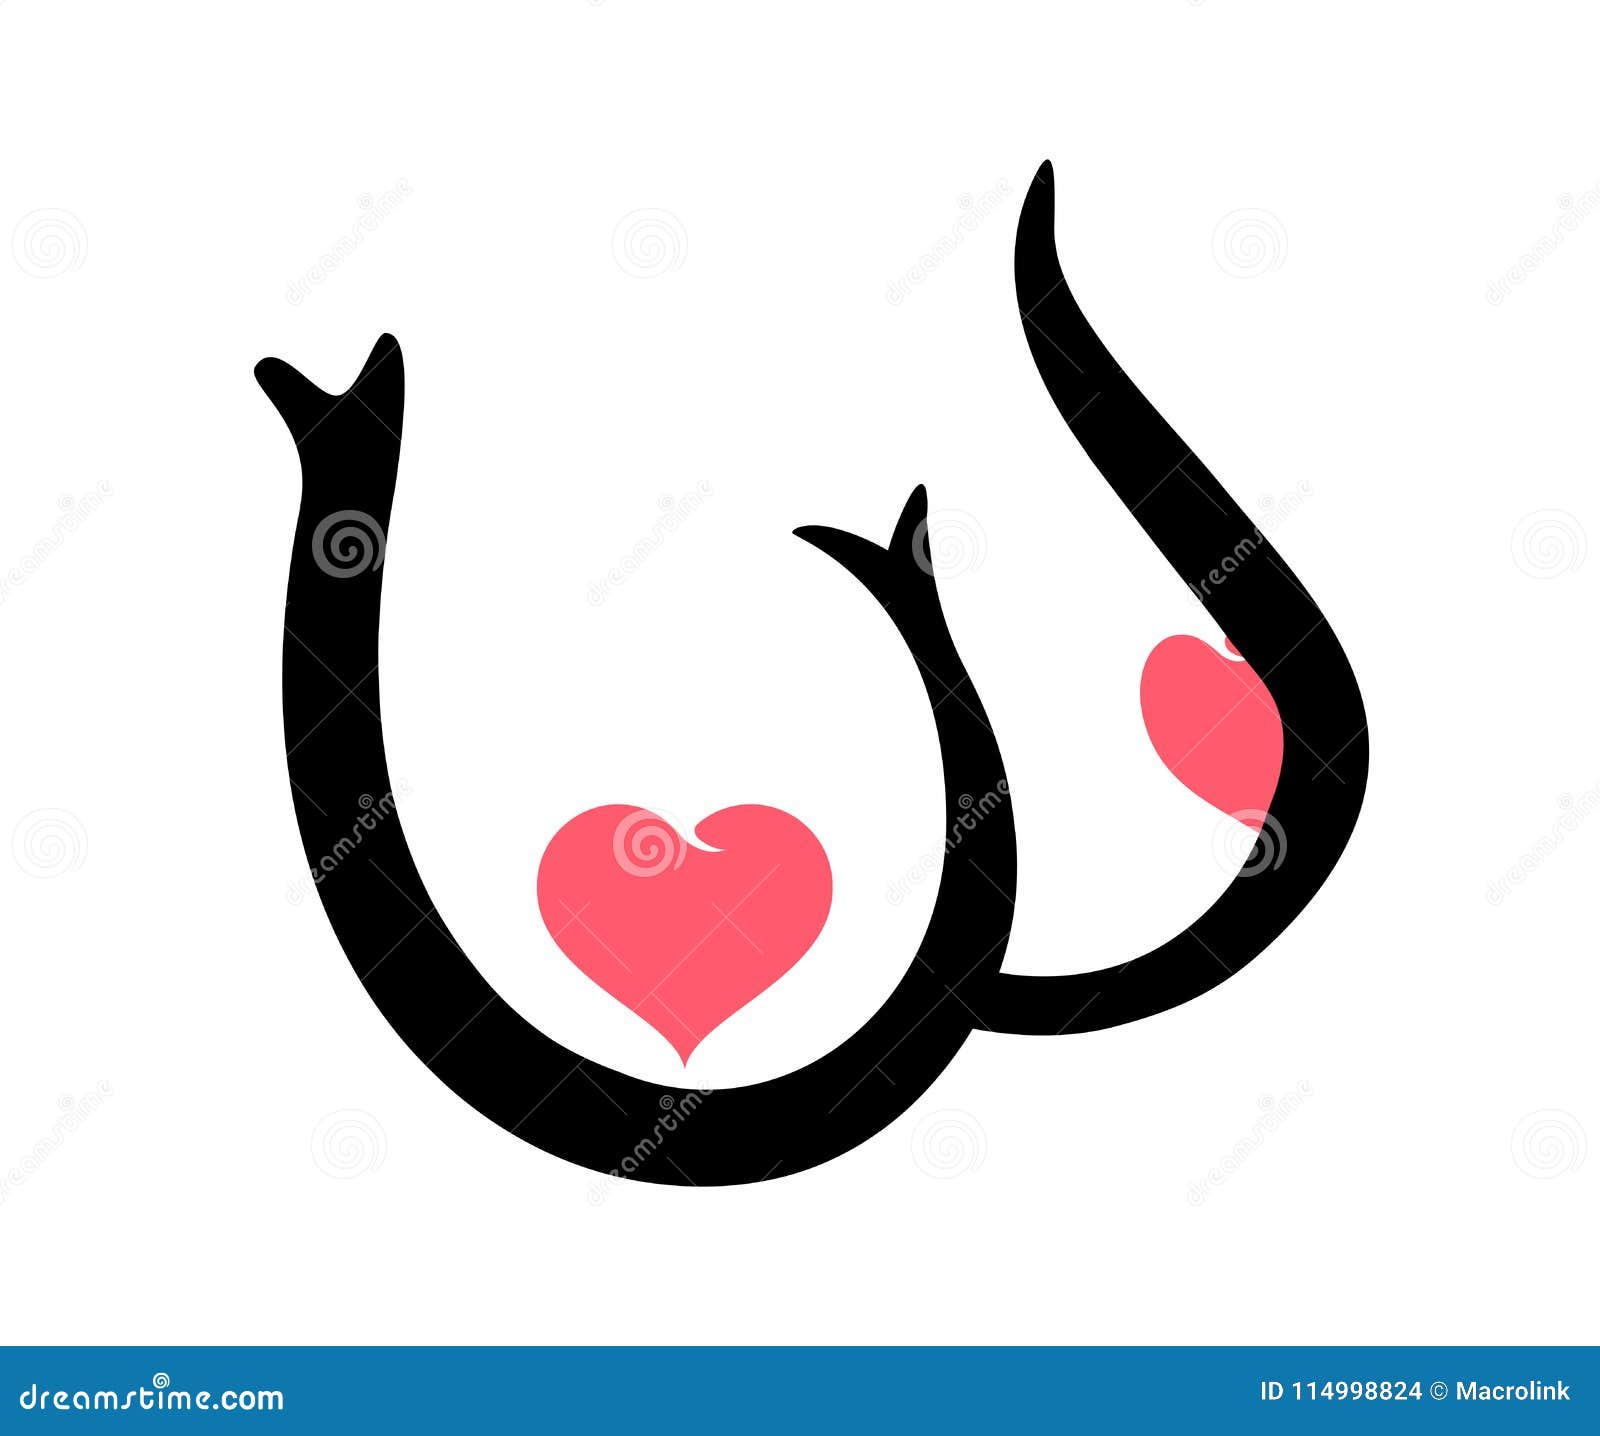 Vector Boobs Icon with Hearts Isolated on White Background - Erotic  Illustration of Female Tits for Adult Content. Stock Vector - Illustration  of icon, design: 114998824